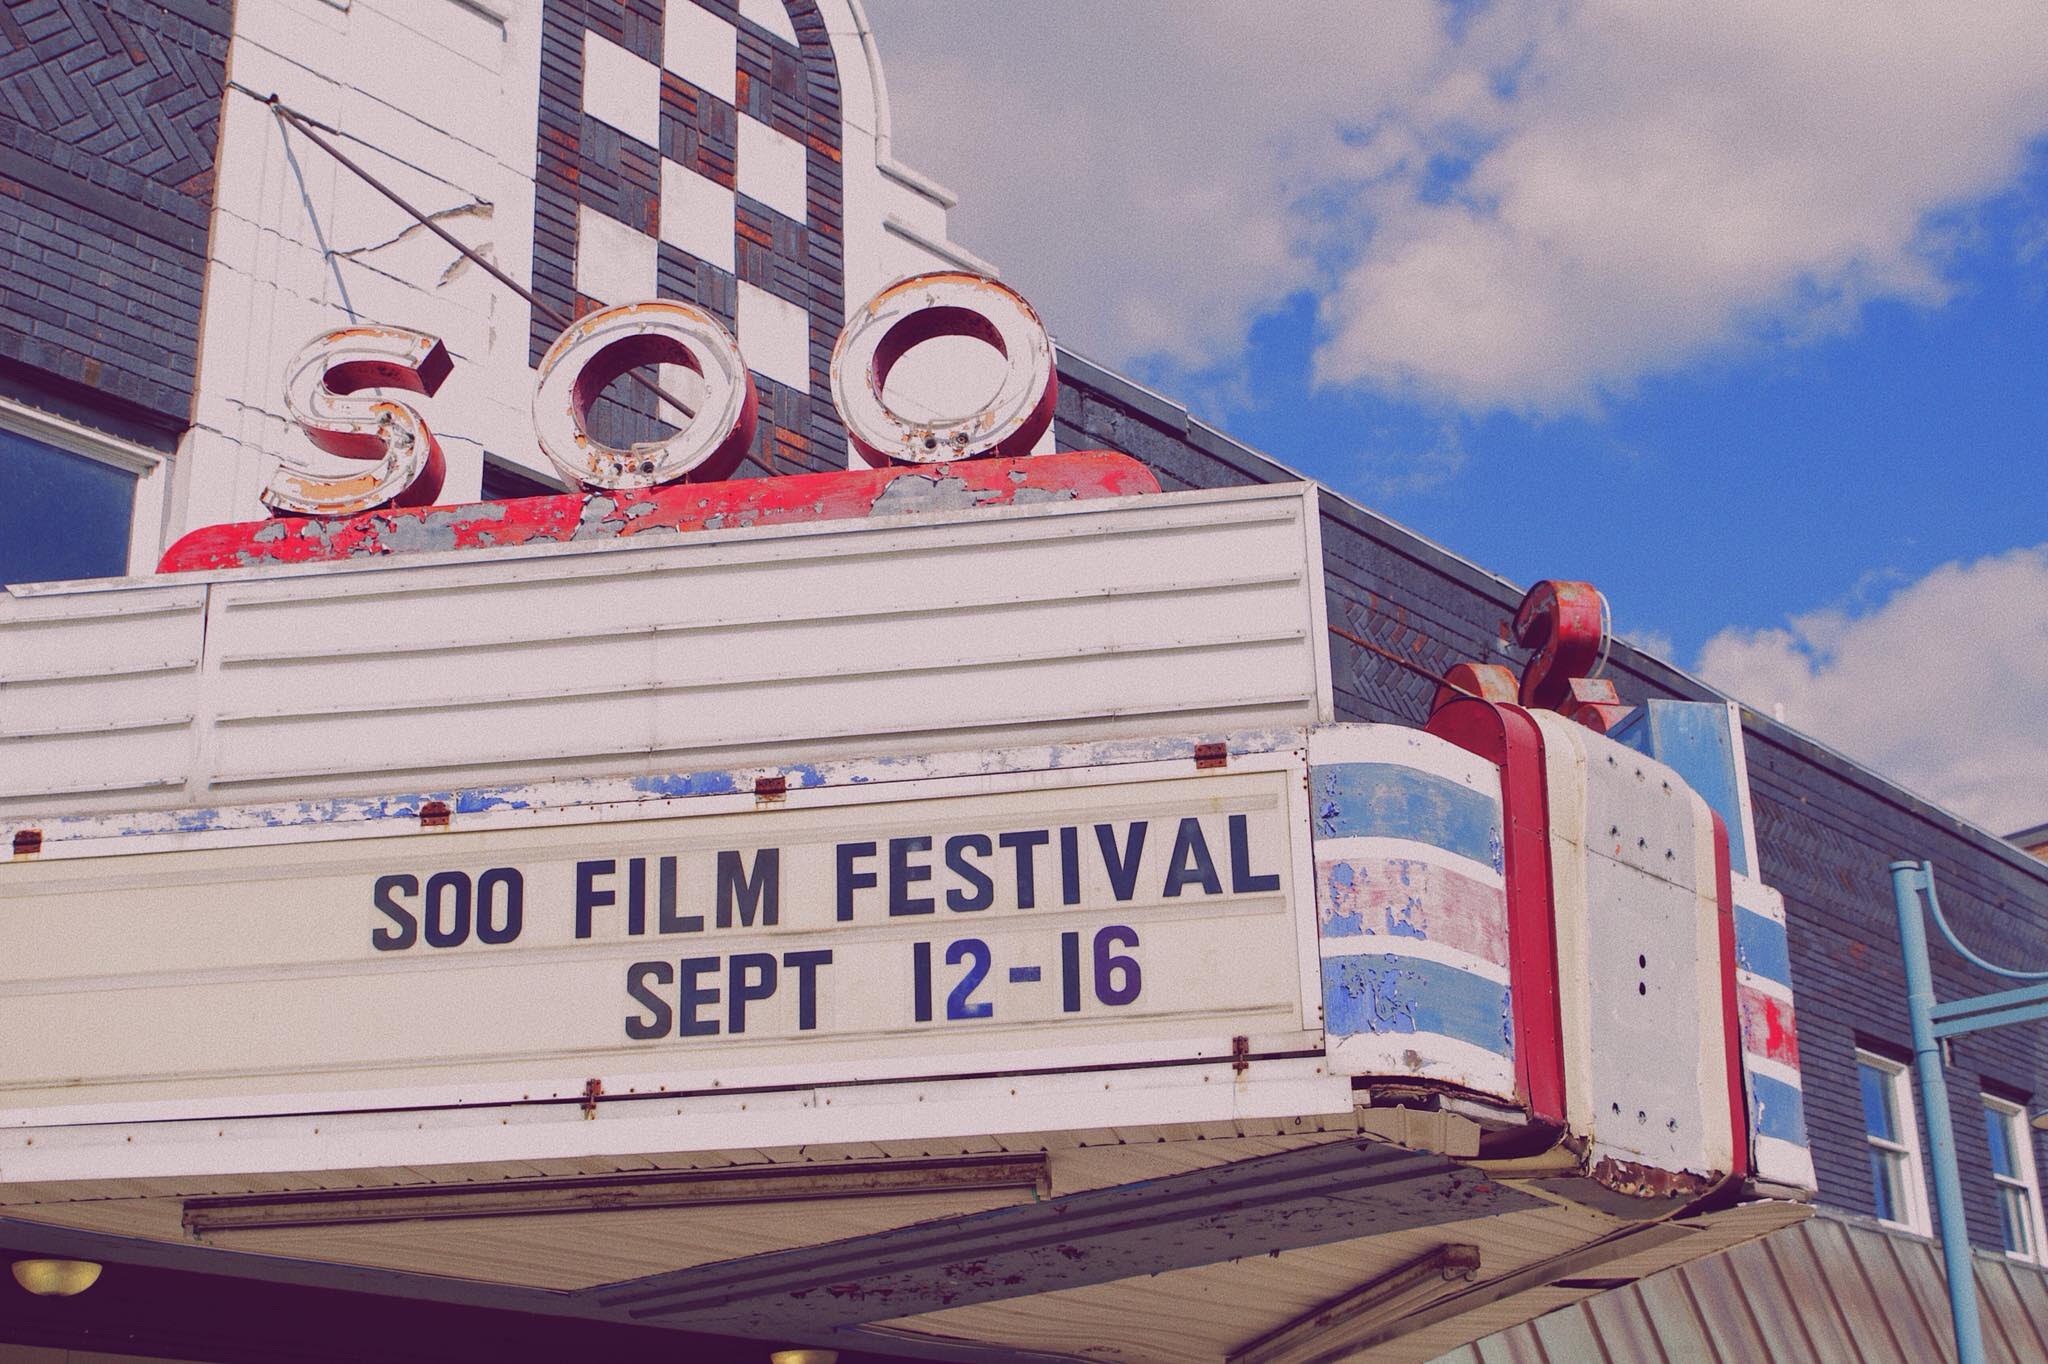 This year's Soo Film Festival will take place Sept. 13-17.